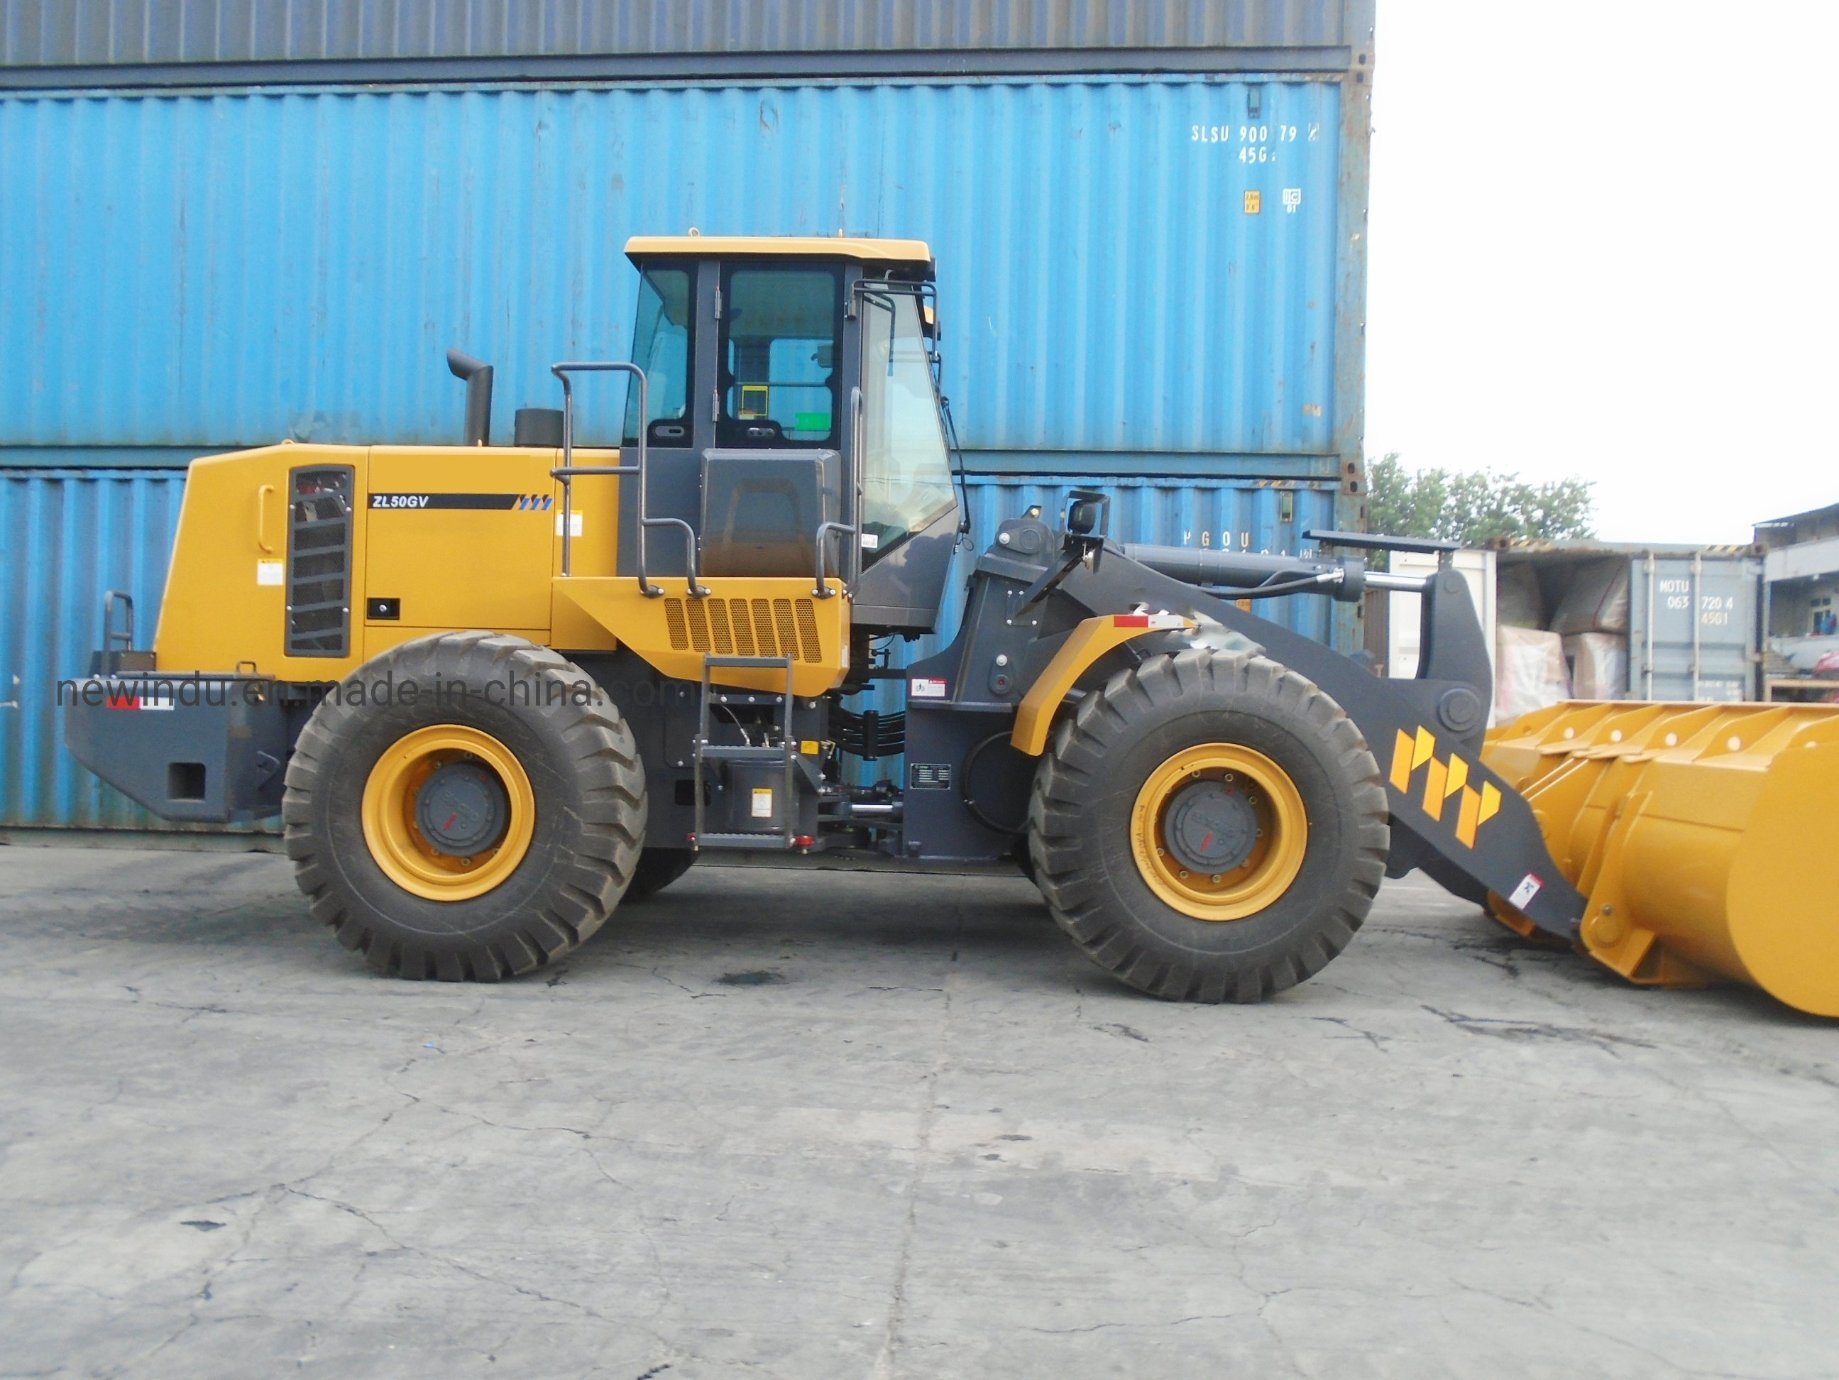 New China Top Brand Ssl750 7.5 Ton Compact Loader for Sale